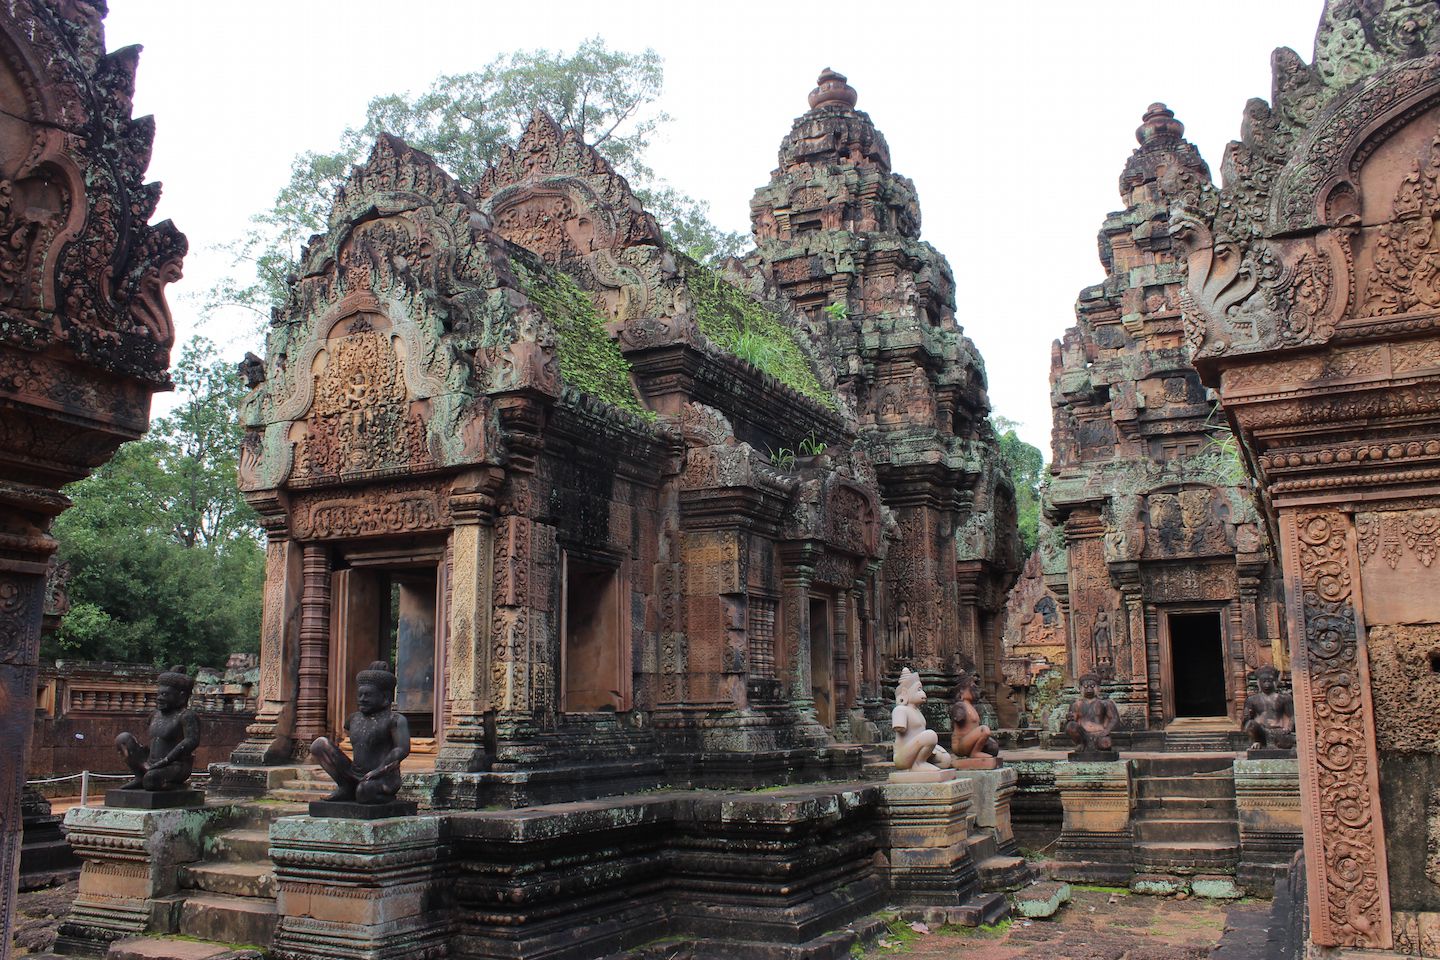 View of the three towers at Banteay Srei